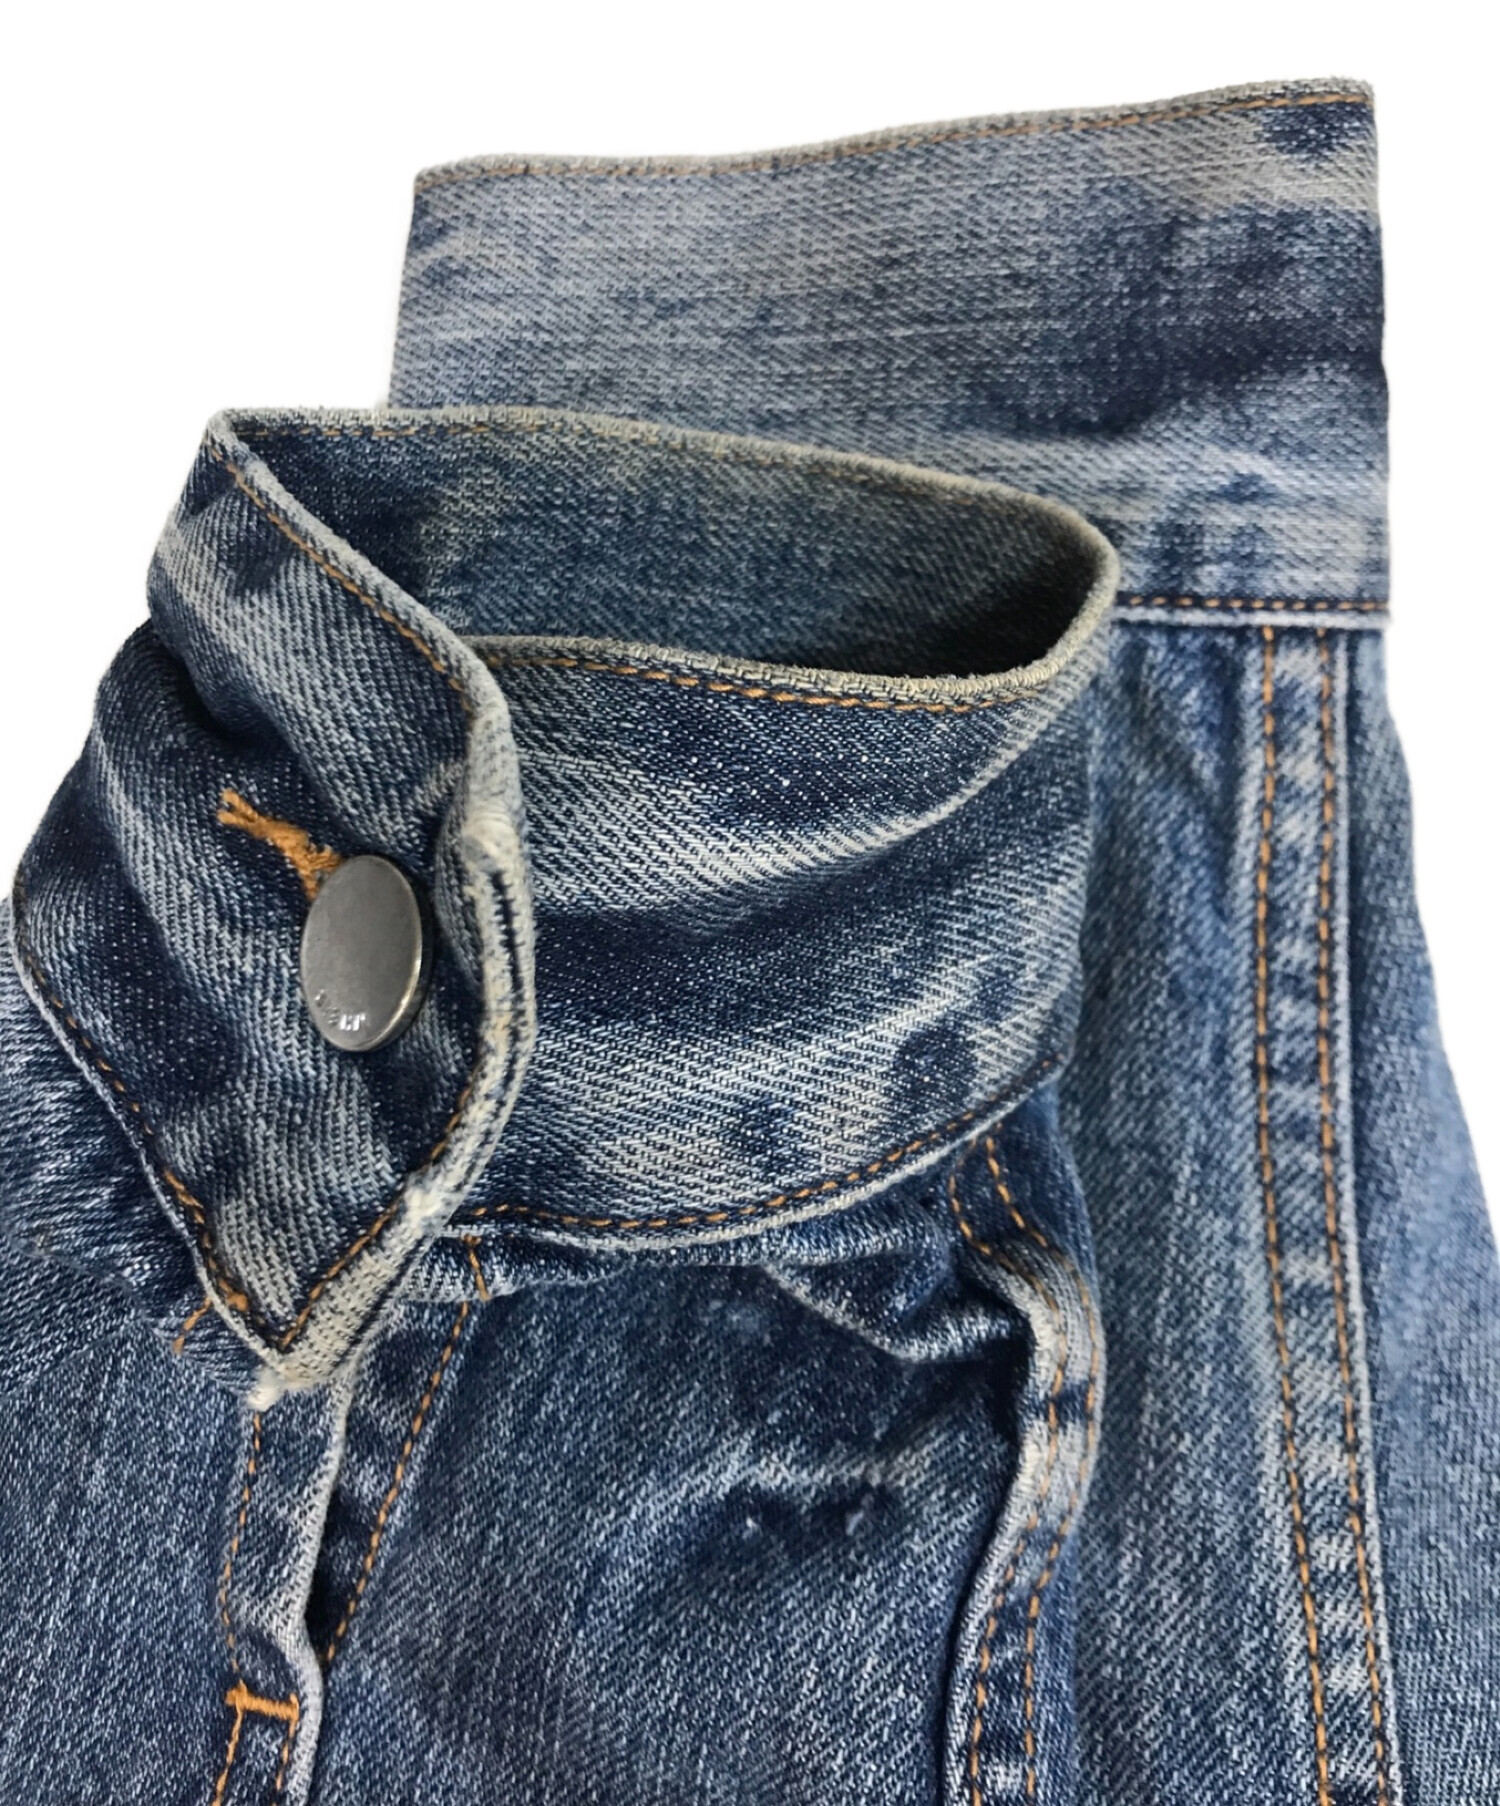 WHEIR Bobson BOBSON (ウェアボブソン) BIG Details Jeans　WH-H044-1　doublet 井野将之 デザイン  ブルー サイズ:S